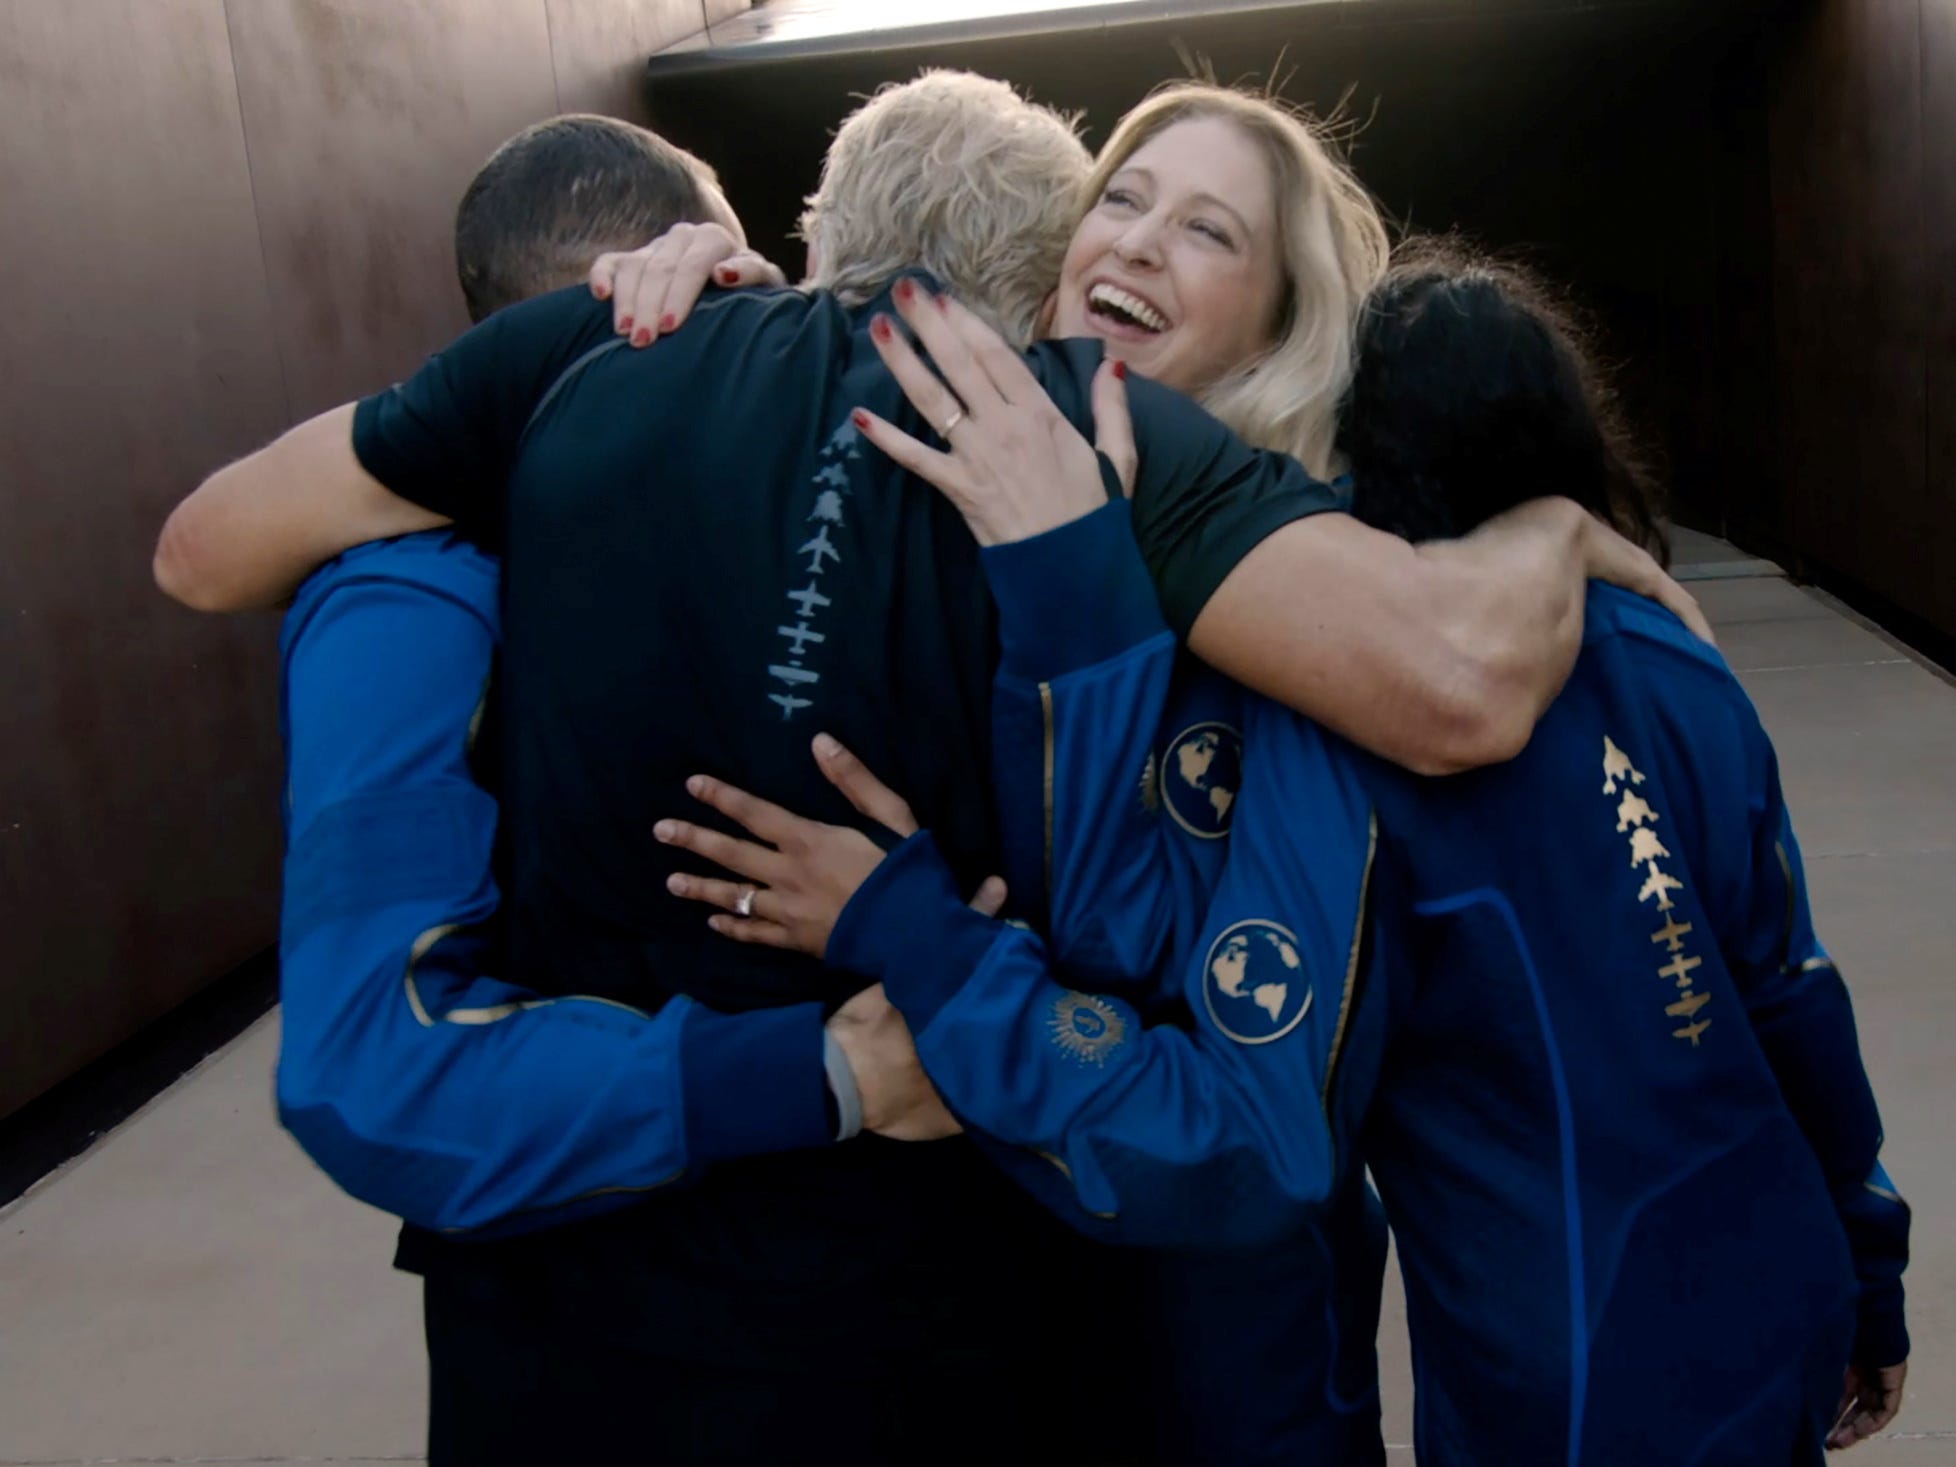 beth moses other virgin galactic crew in astronaut jumpsuits embrace richard branson